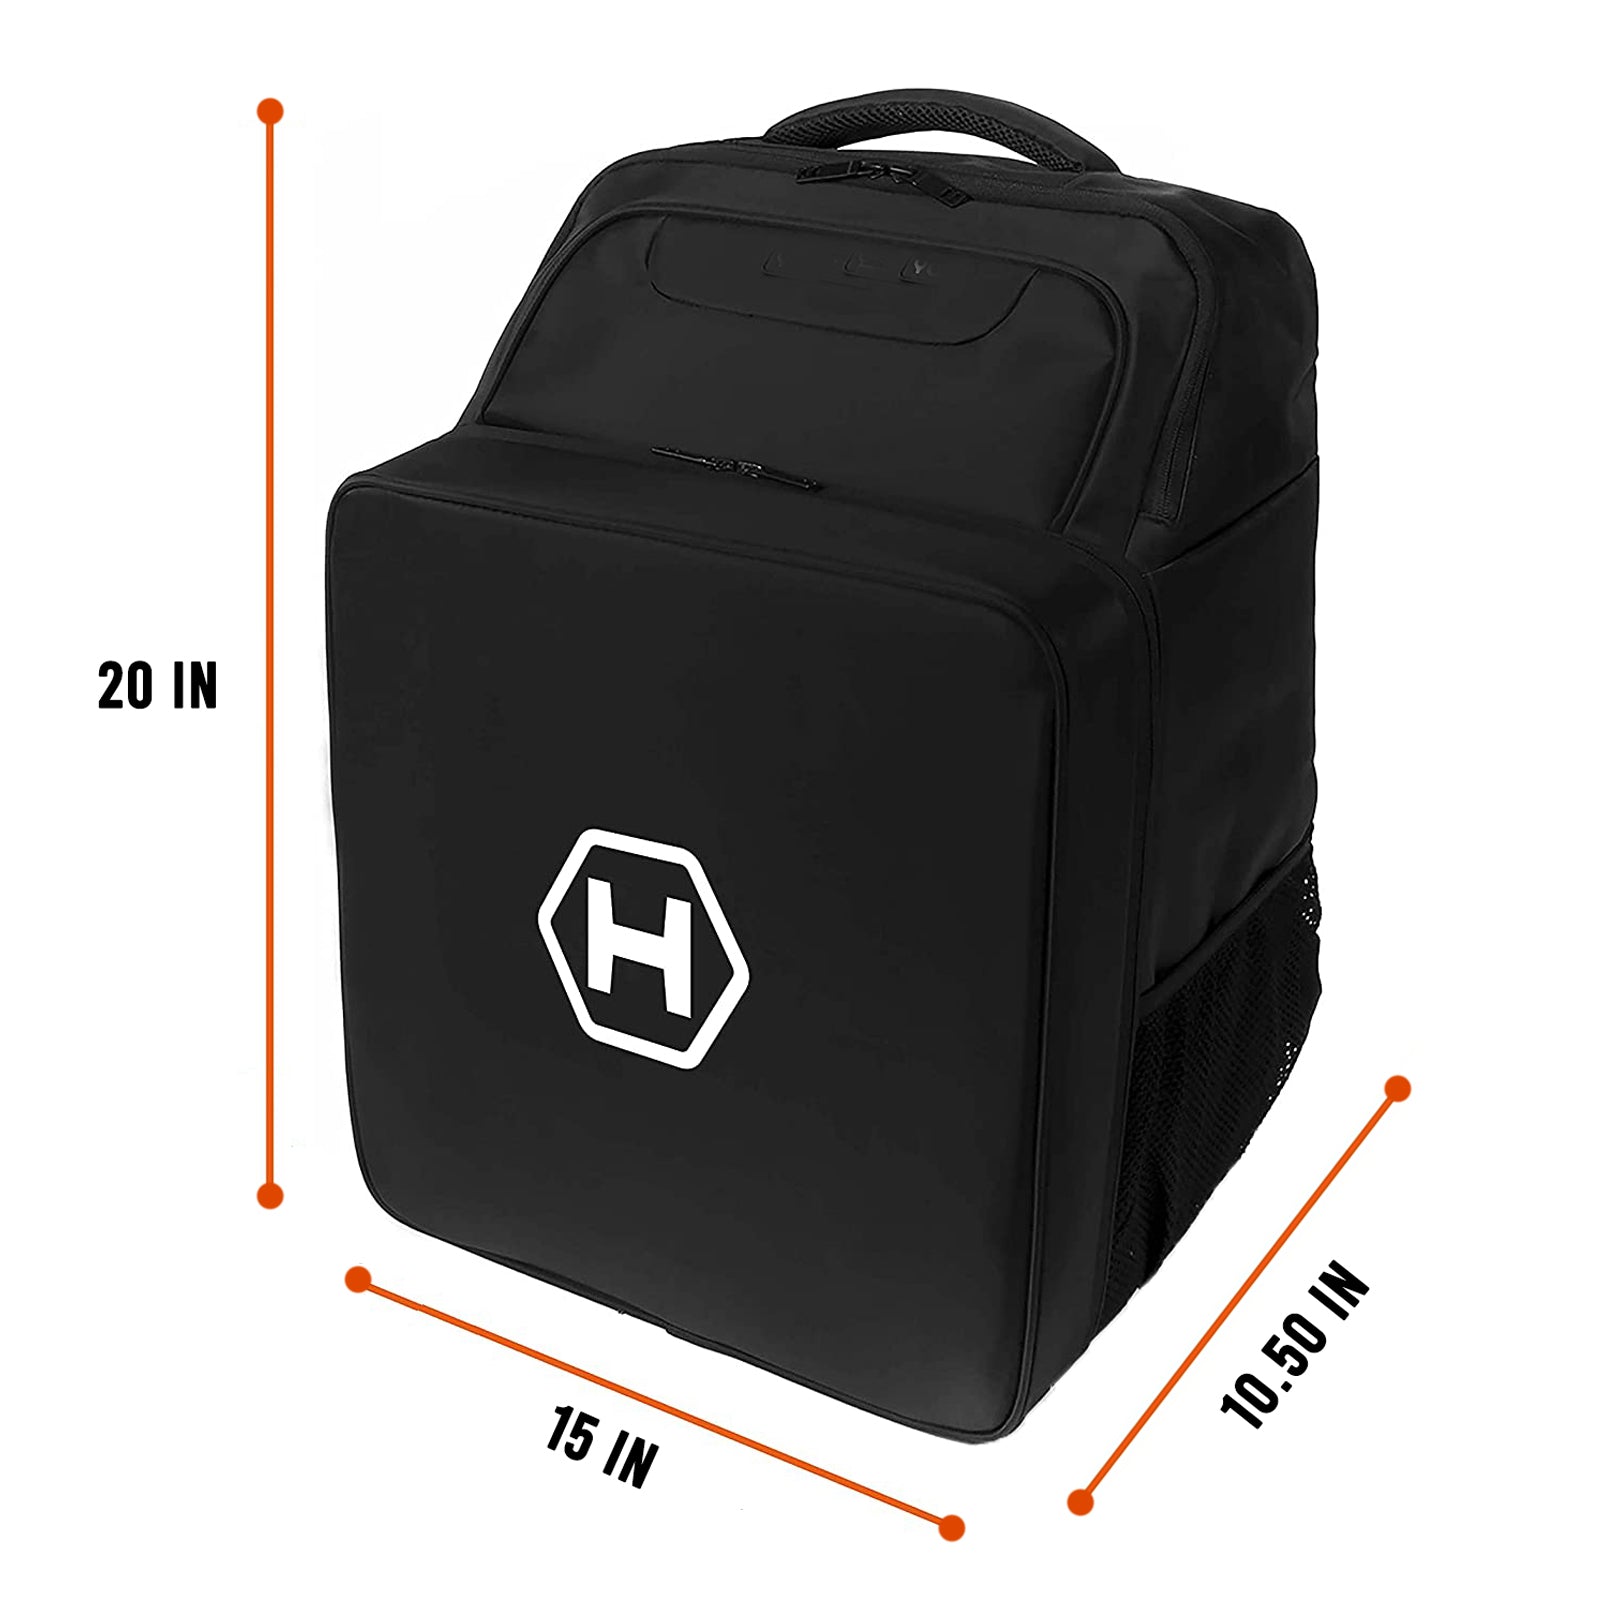 Drone Backpack for Yuneec Typhoon H, Typhoon H PLUS, Typhoon H3, H520 and H520E Portable Adjustable Straps Shoulder Carrying Case Bag Lightweight Shockproof Waterproof